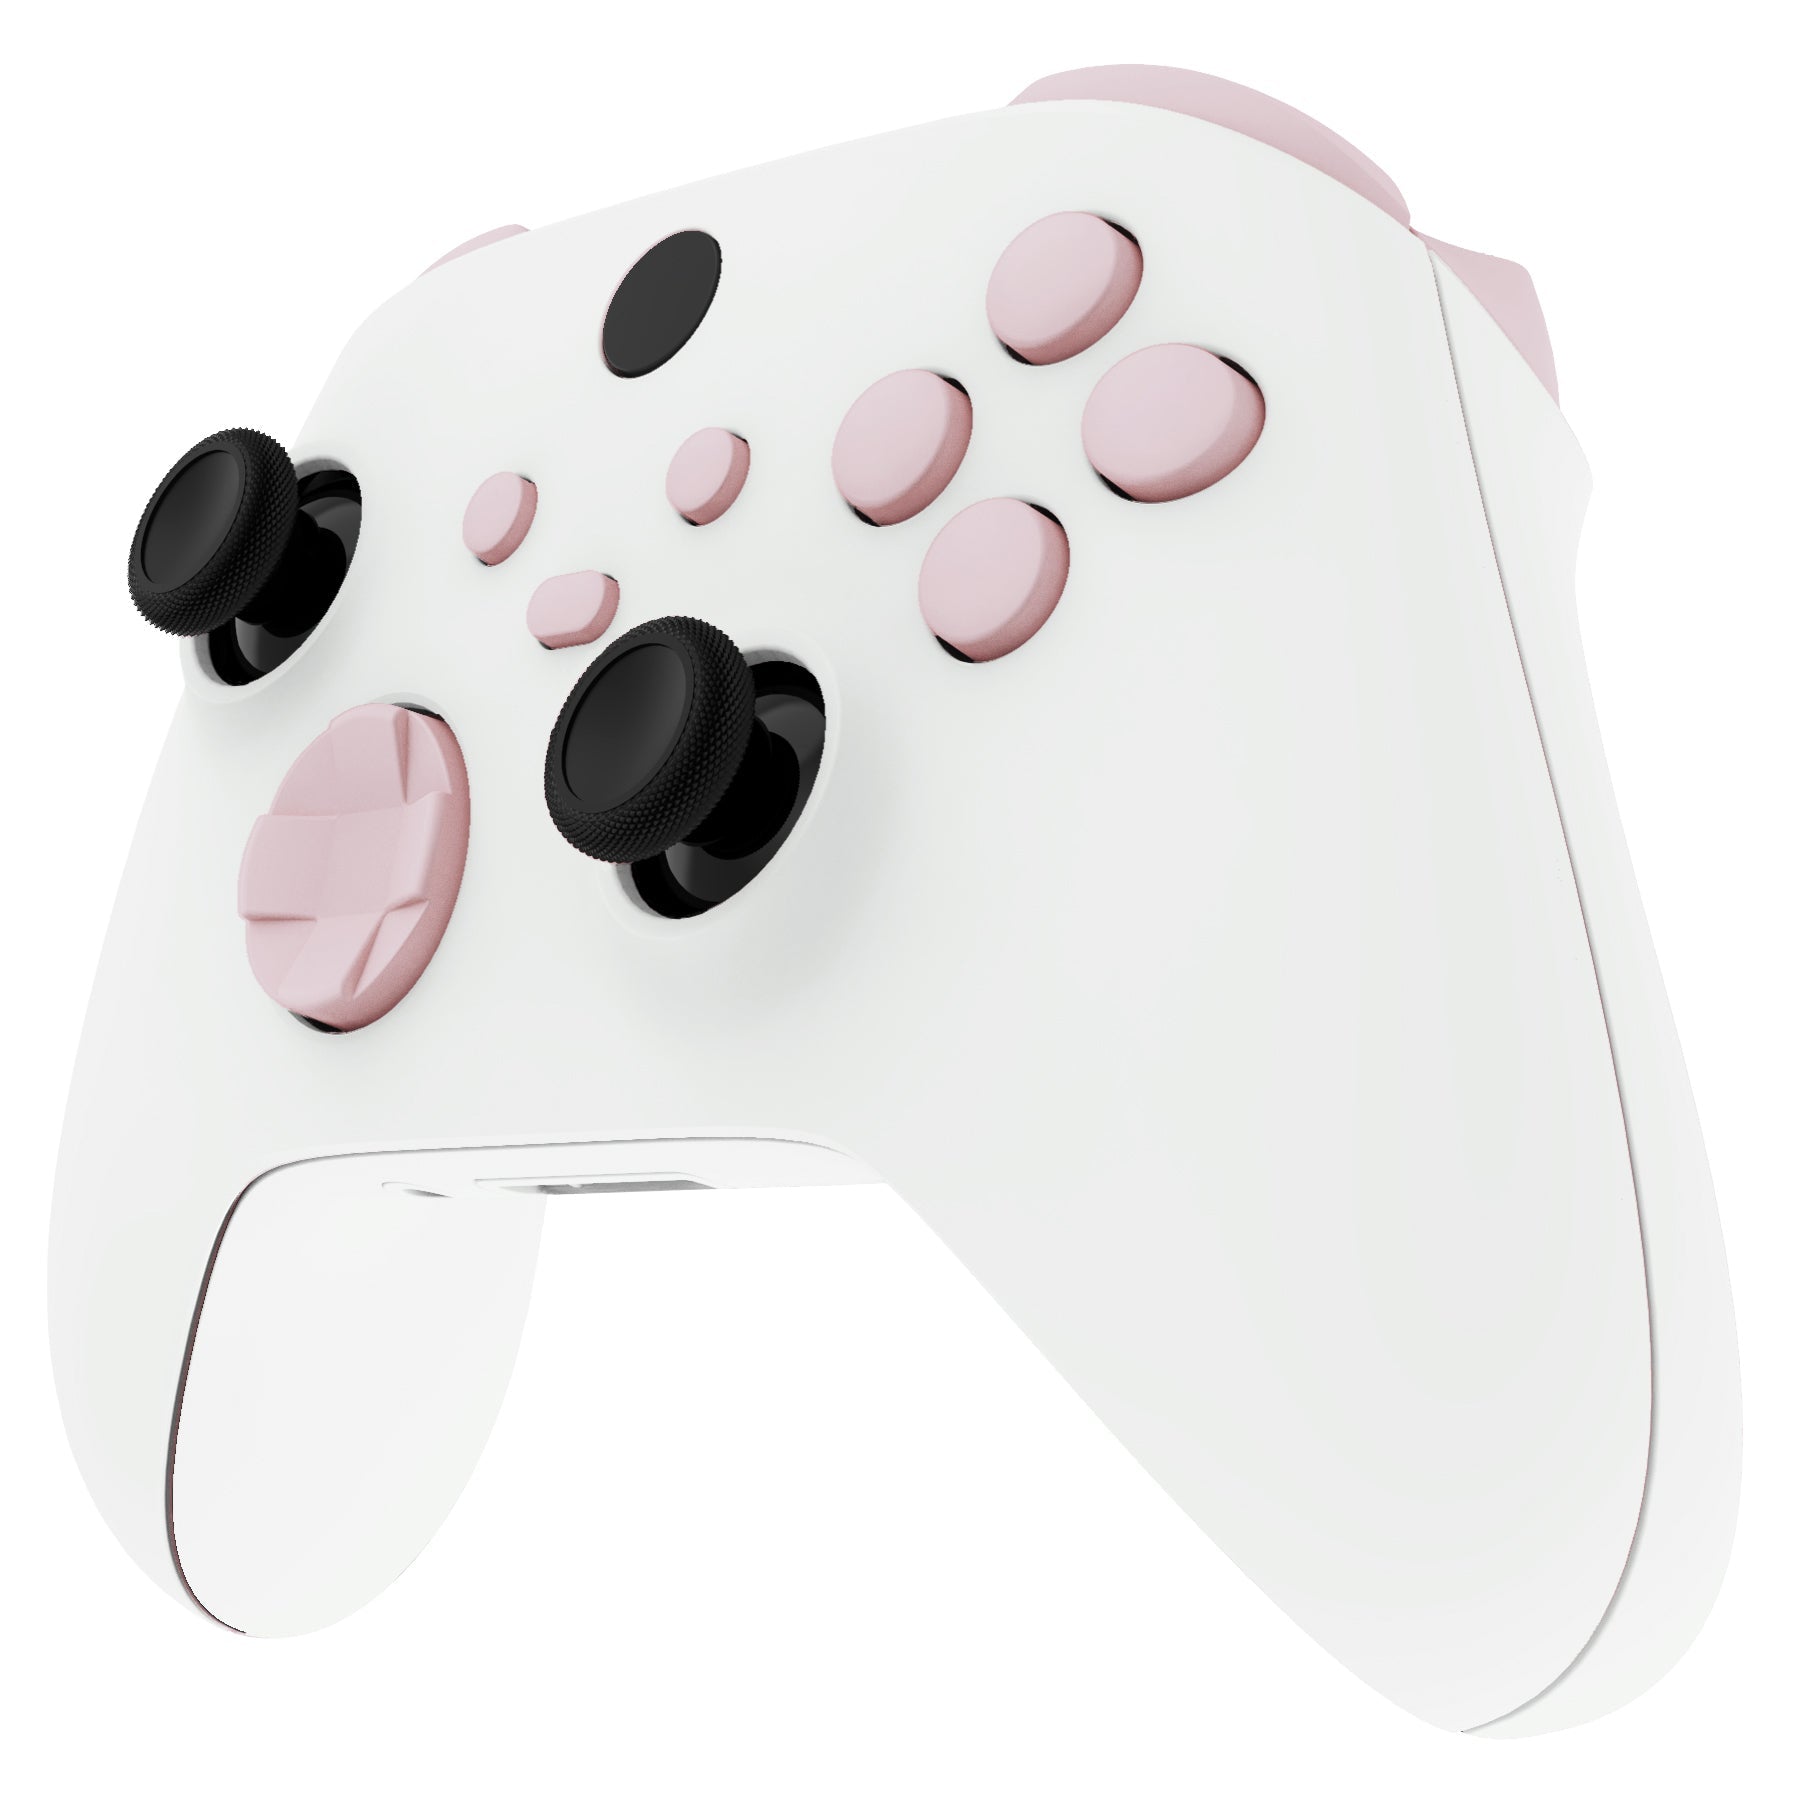 New Xbox Series X Controller Colors Include Hot Pink, Tartan